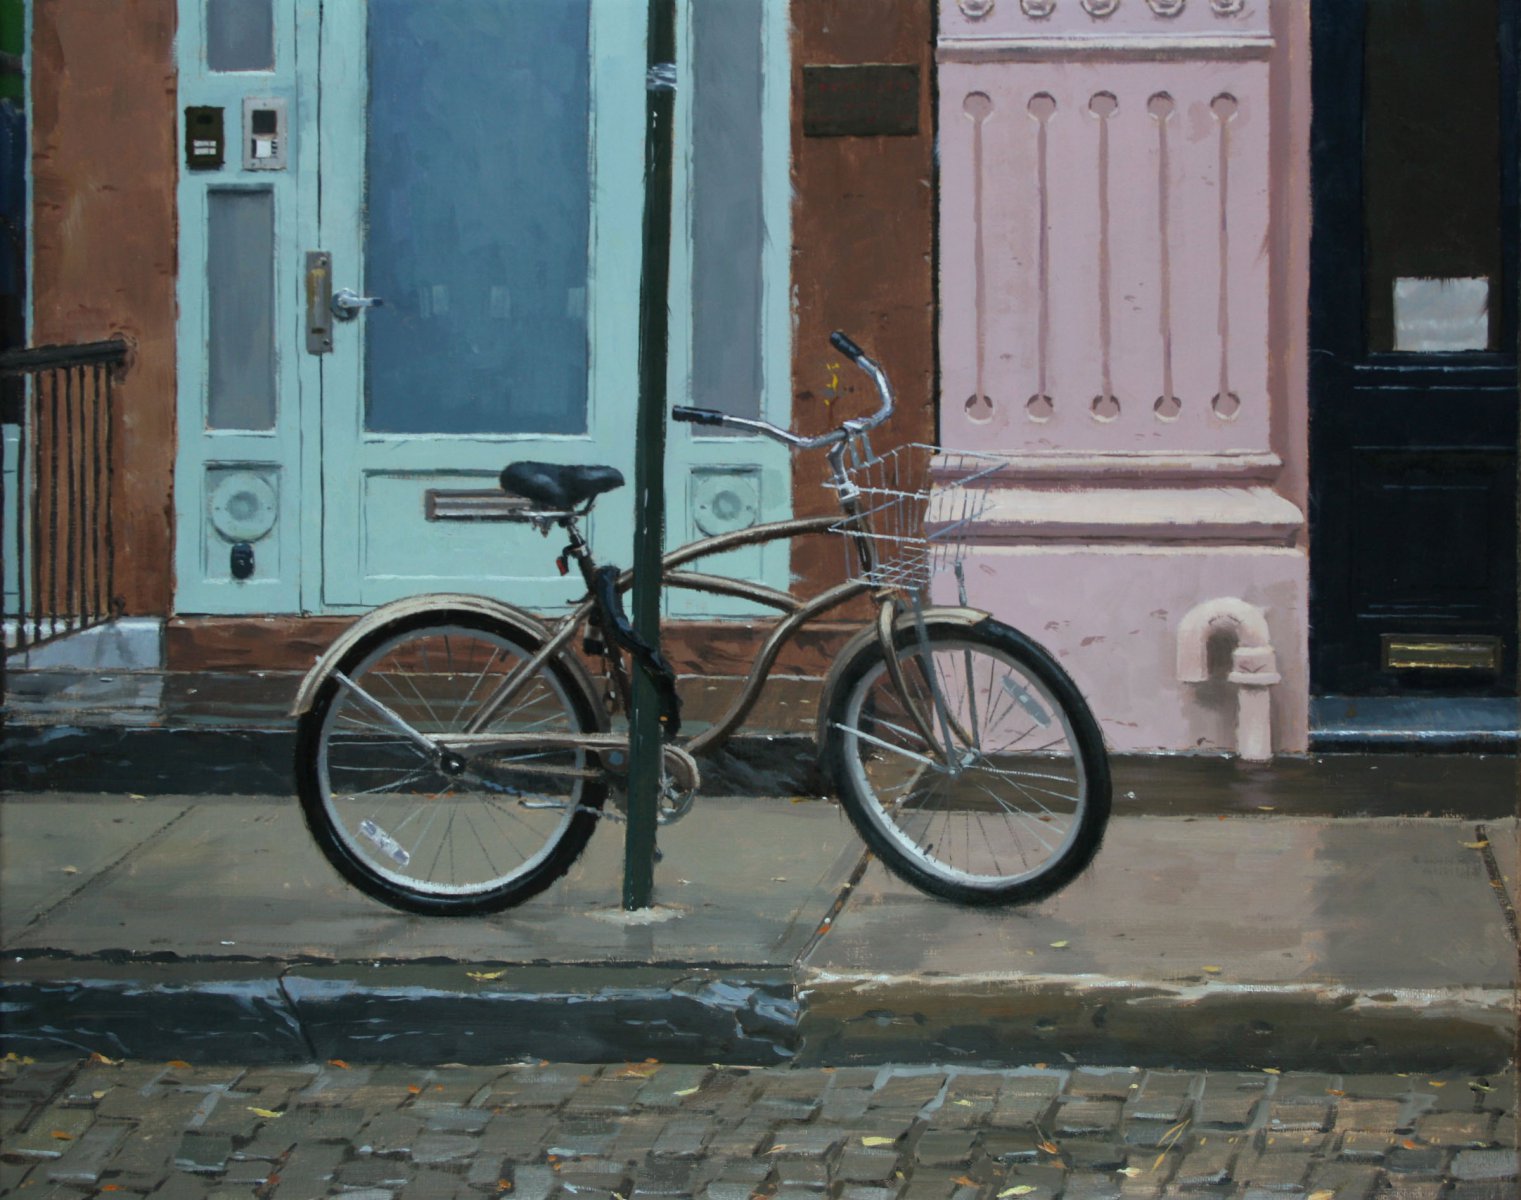 Bicycle in Rain - Vincent Giarrano